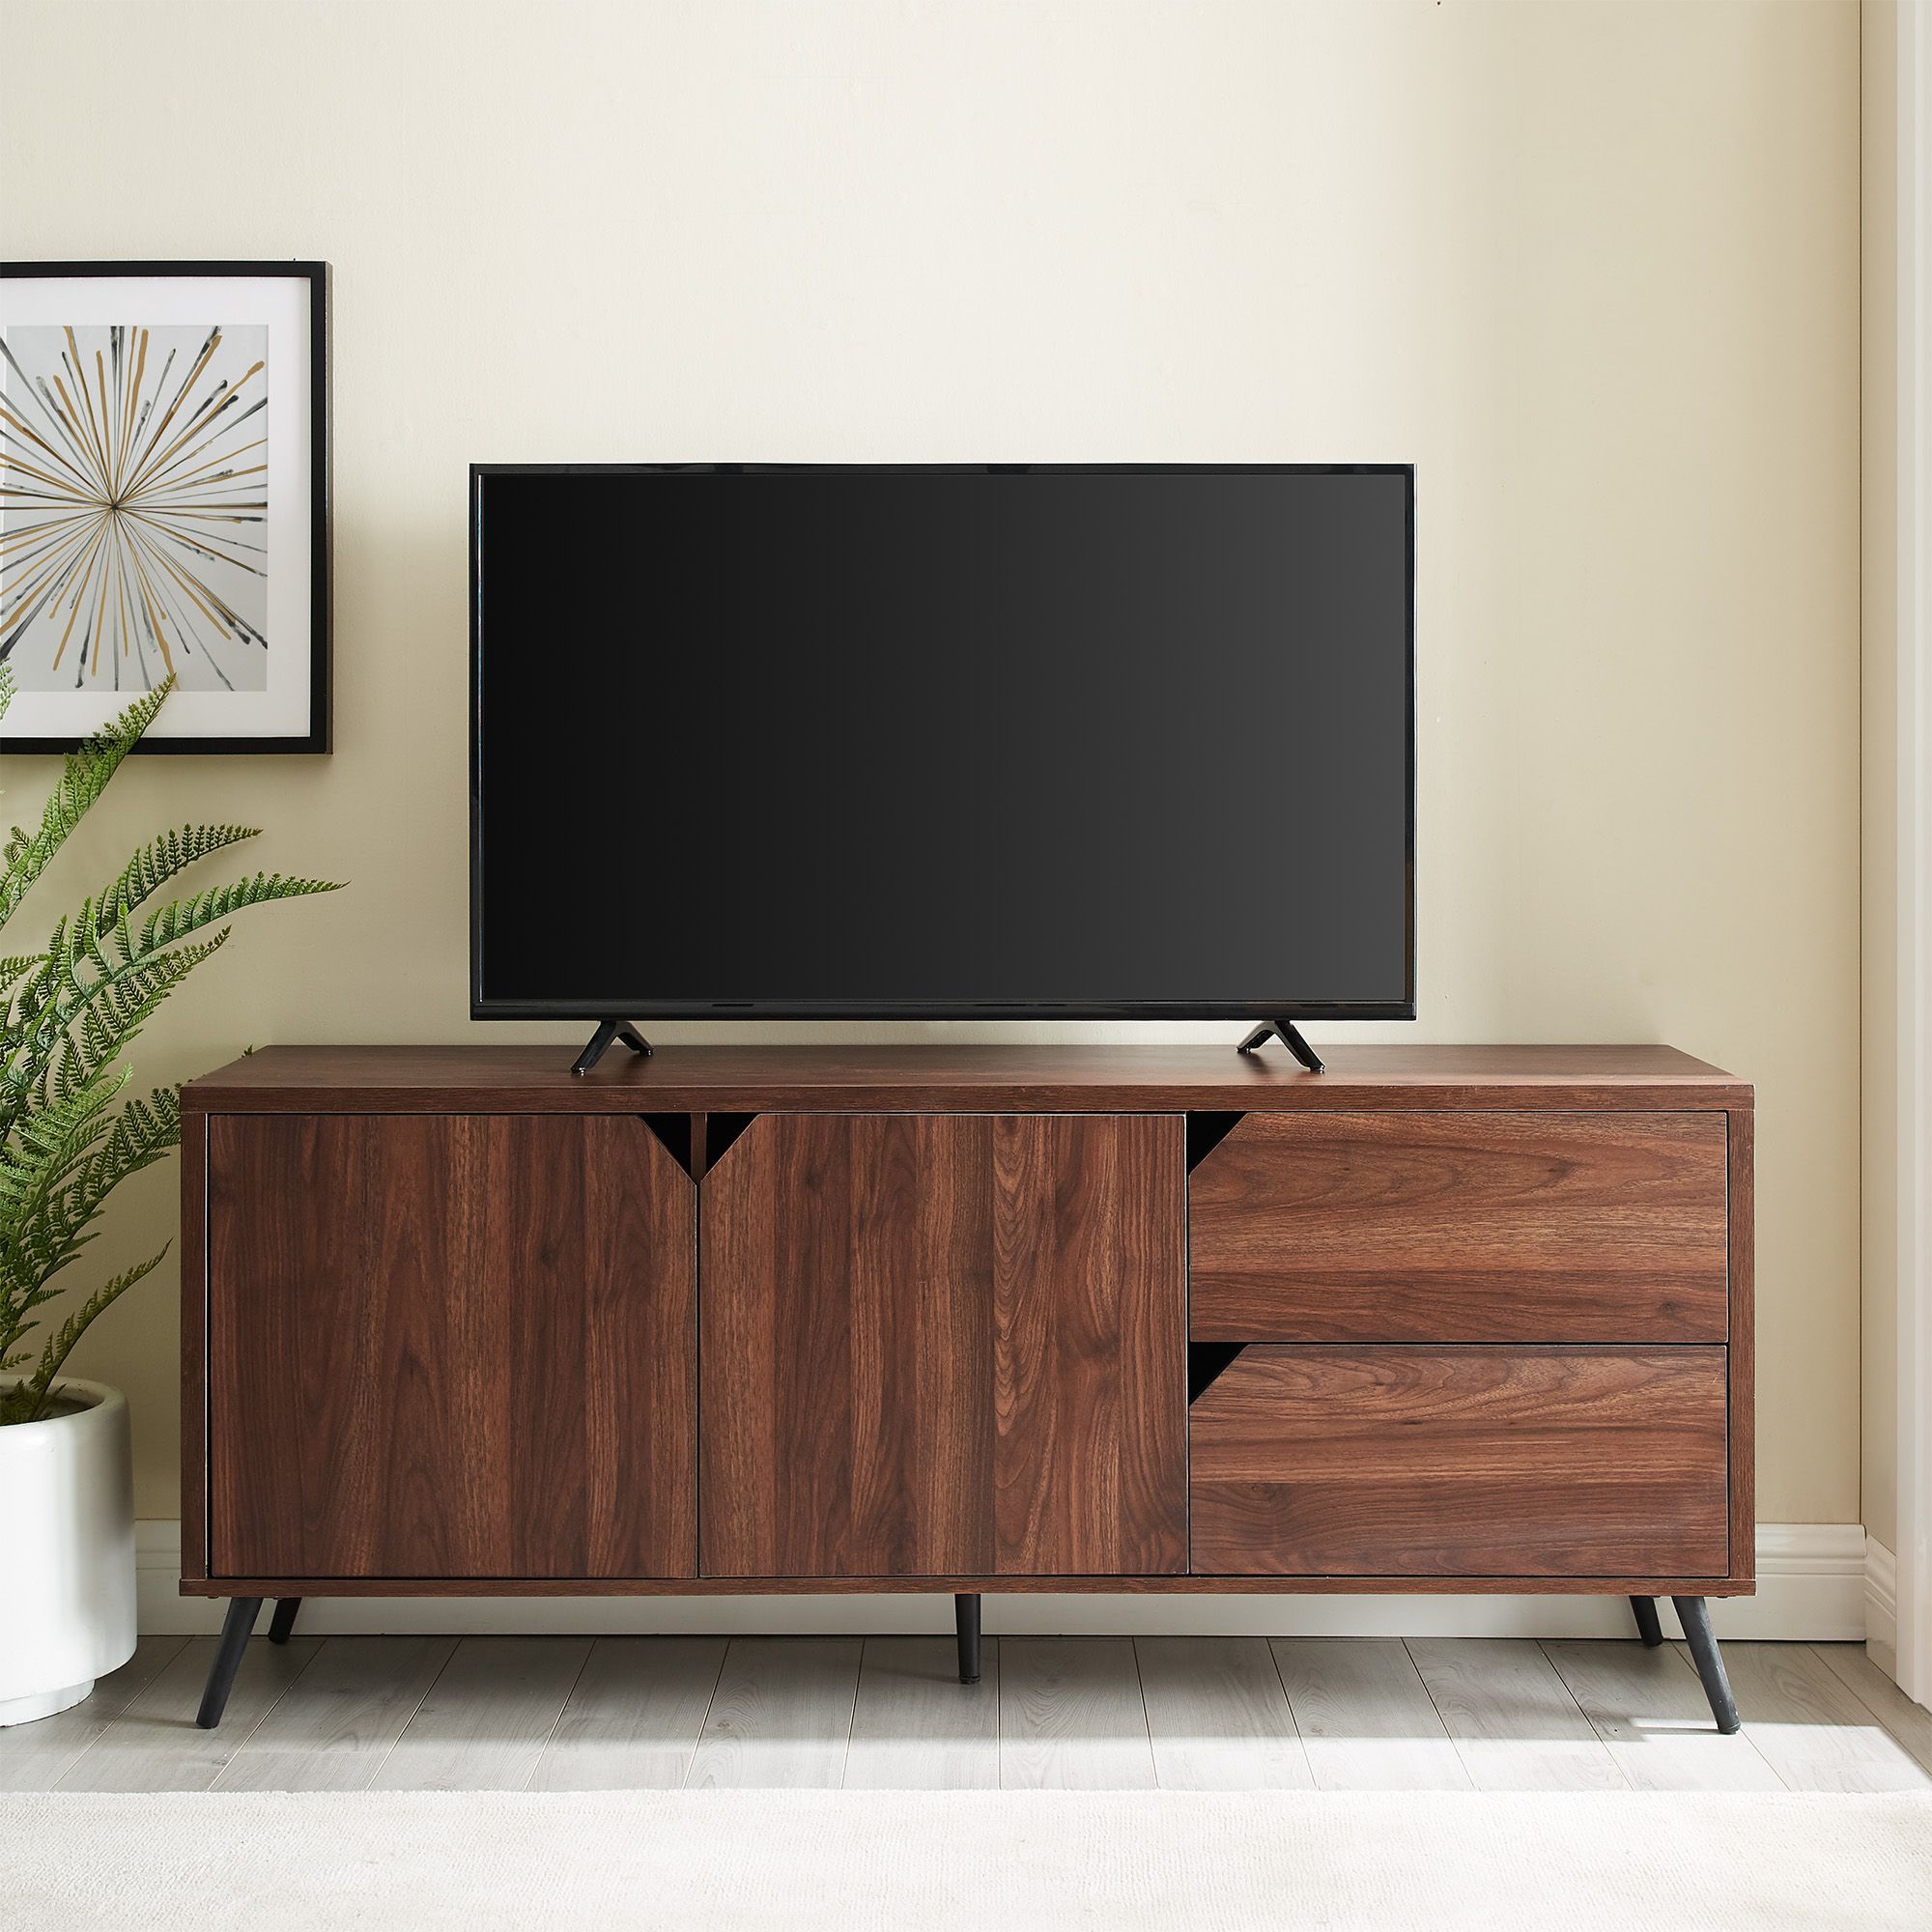 Home In 2020 | Tv Stand With Storage, Mid Century, Dark Walnut For Mid Century 2 Door Tv Stands In Dark Walnut (Gallery 12 of 20)